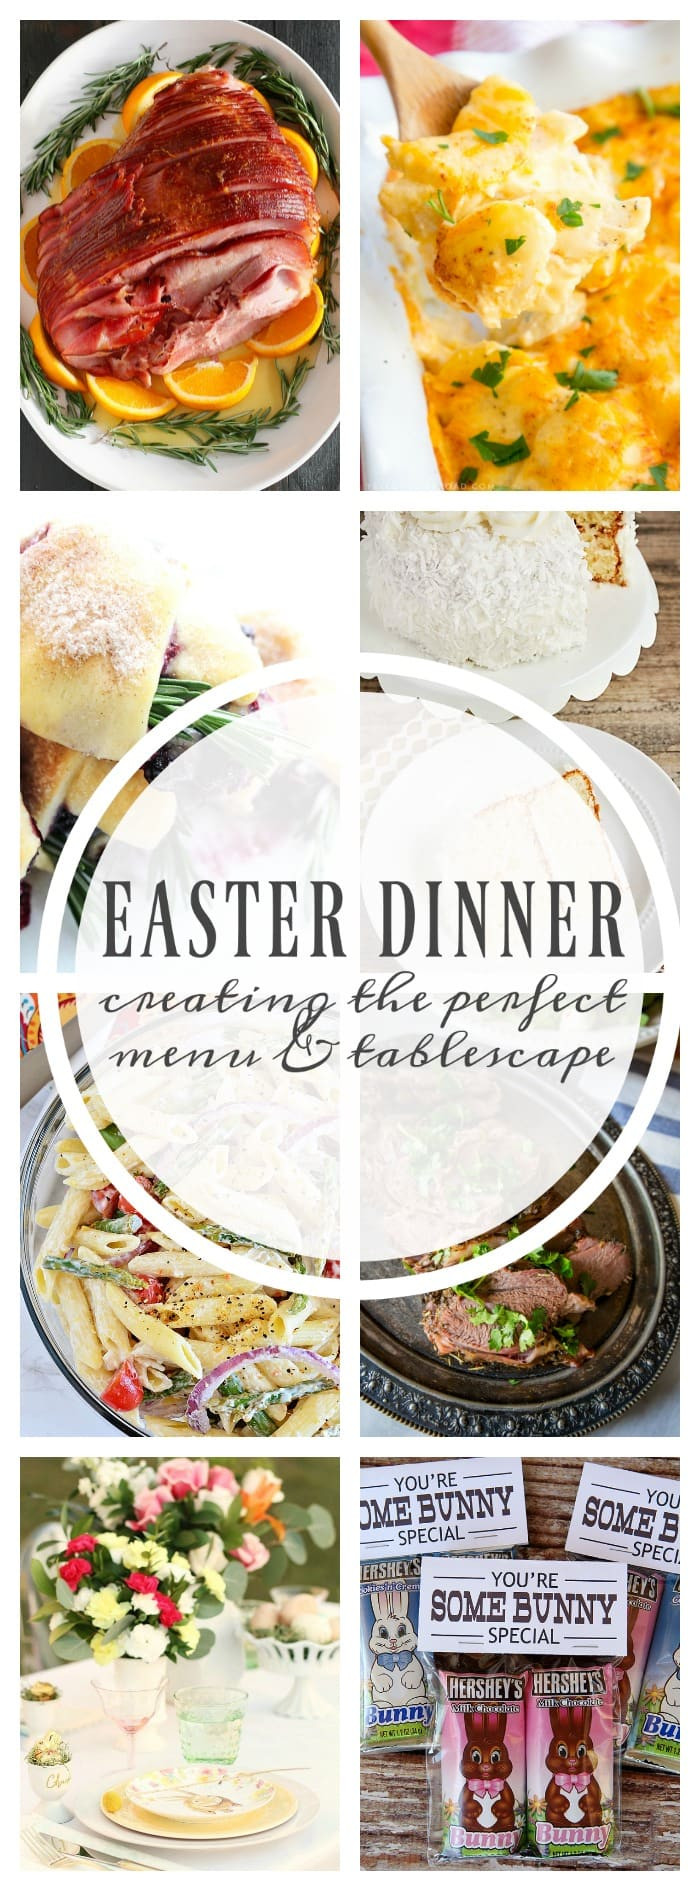 Perfect Easter Dinner Menu
 EASTER DINNER CREATING THE PERFECT MENU & TABLESCAPE A